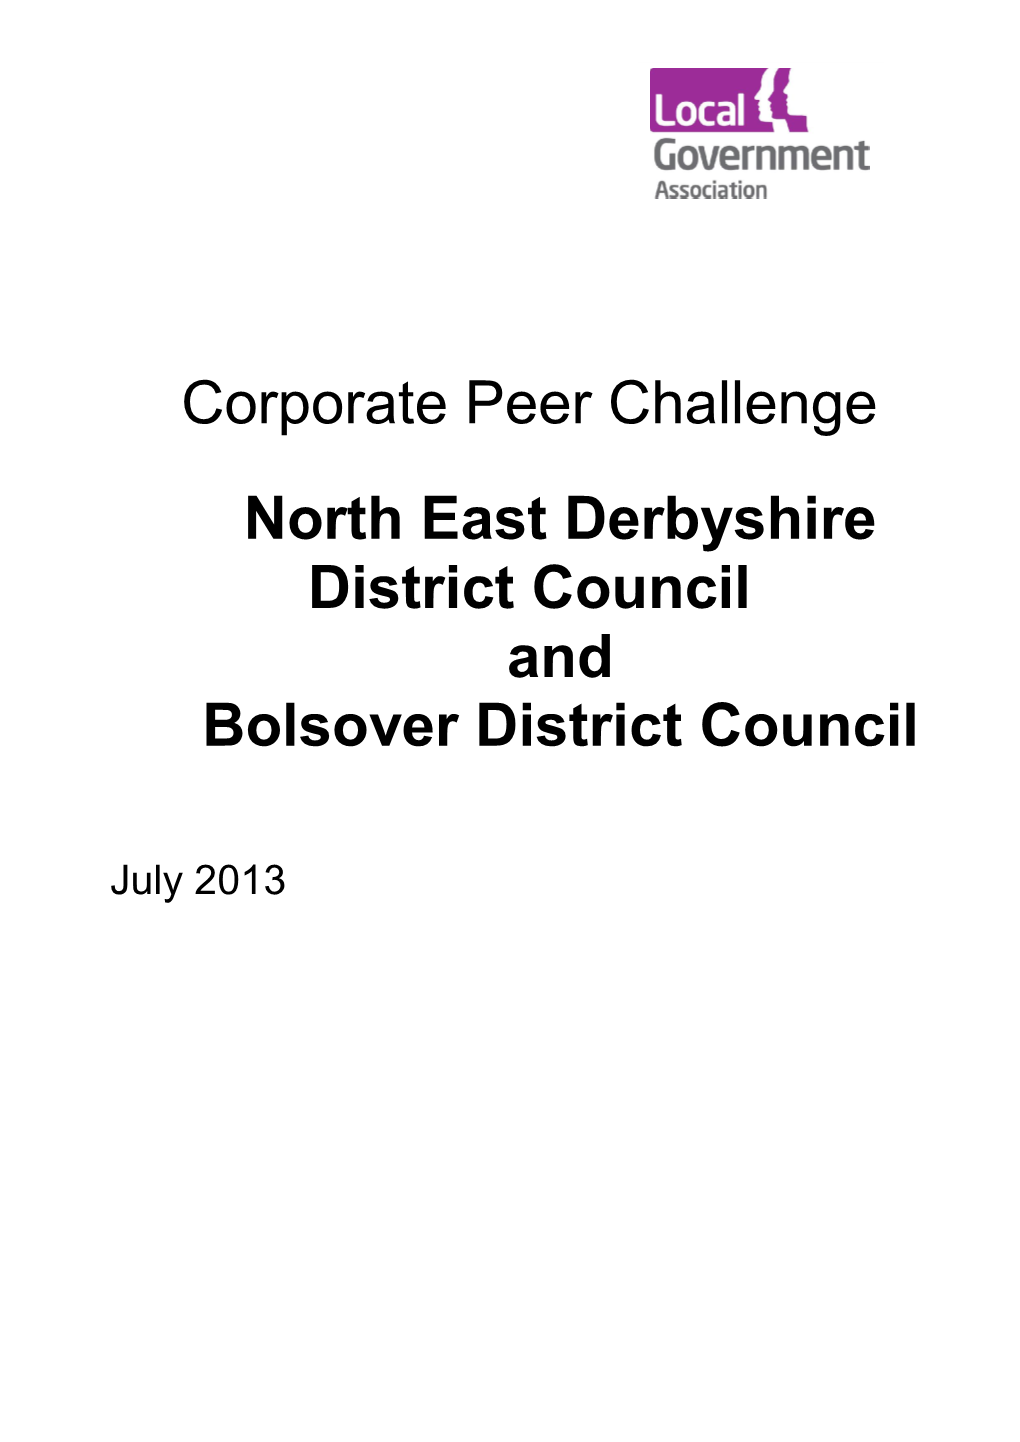 North East Derbyshire District Council and Bolsover District Council Peer Challenge Report 2013